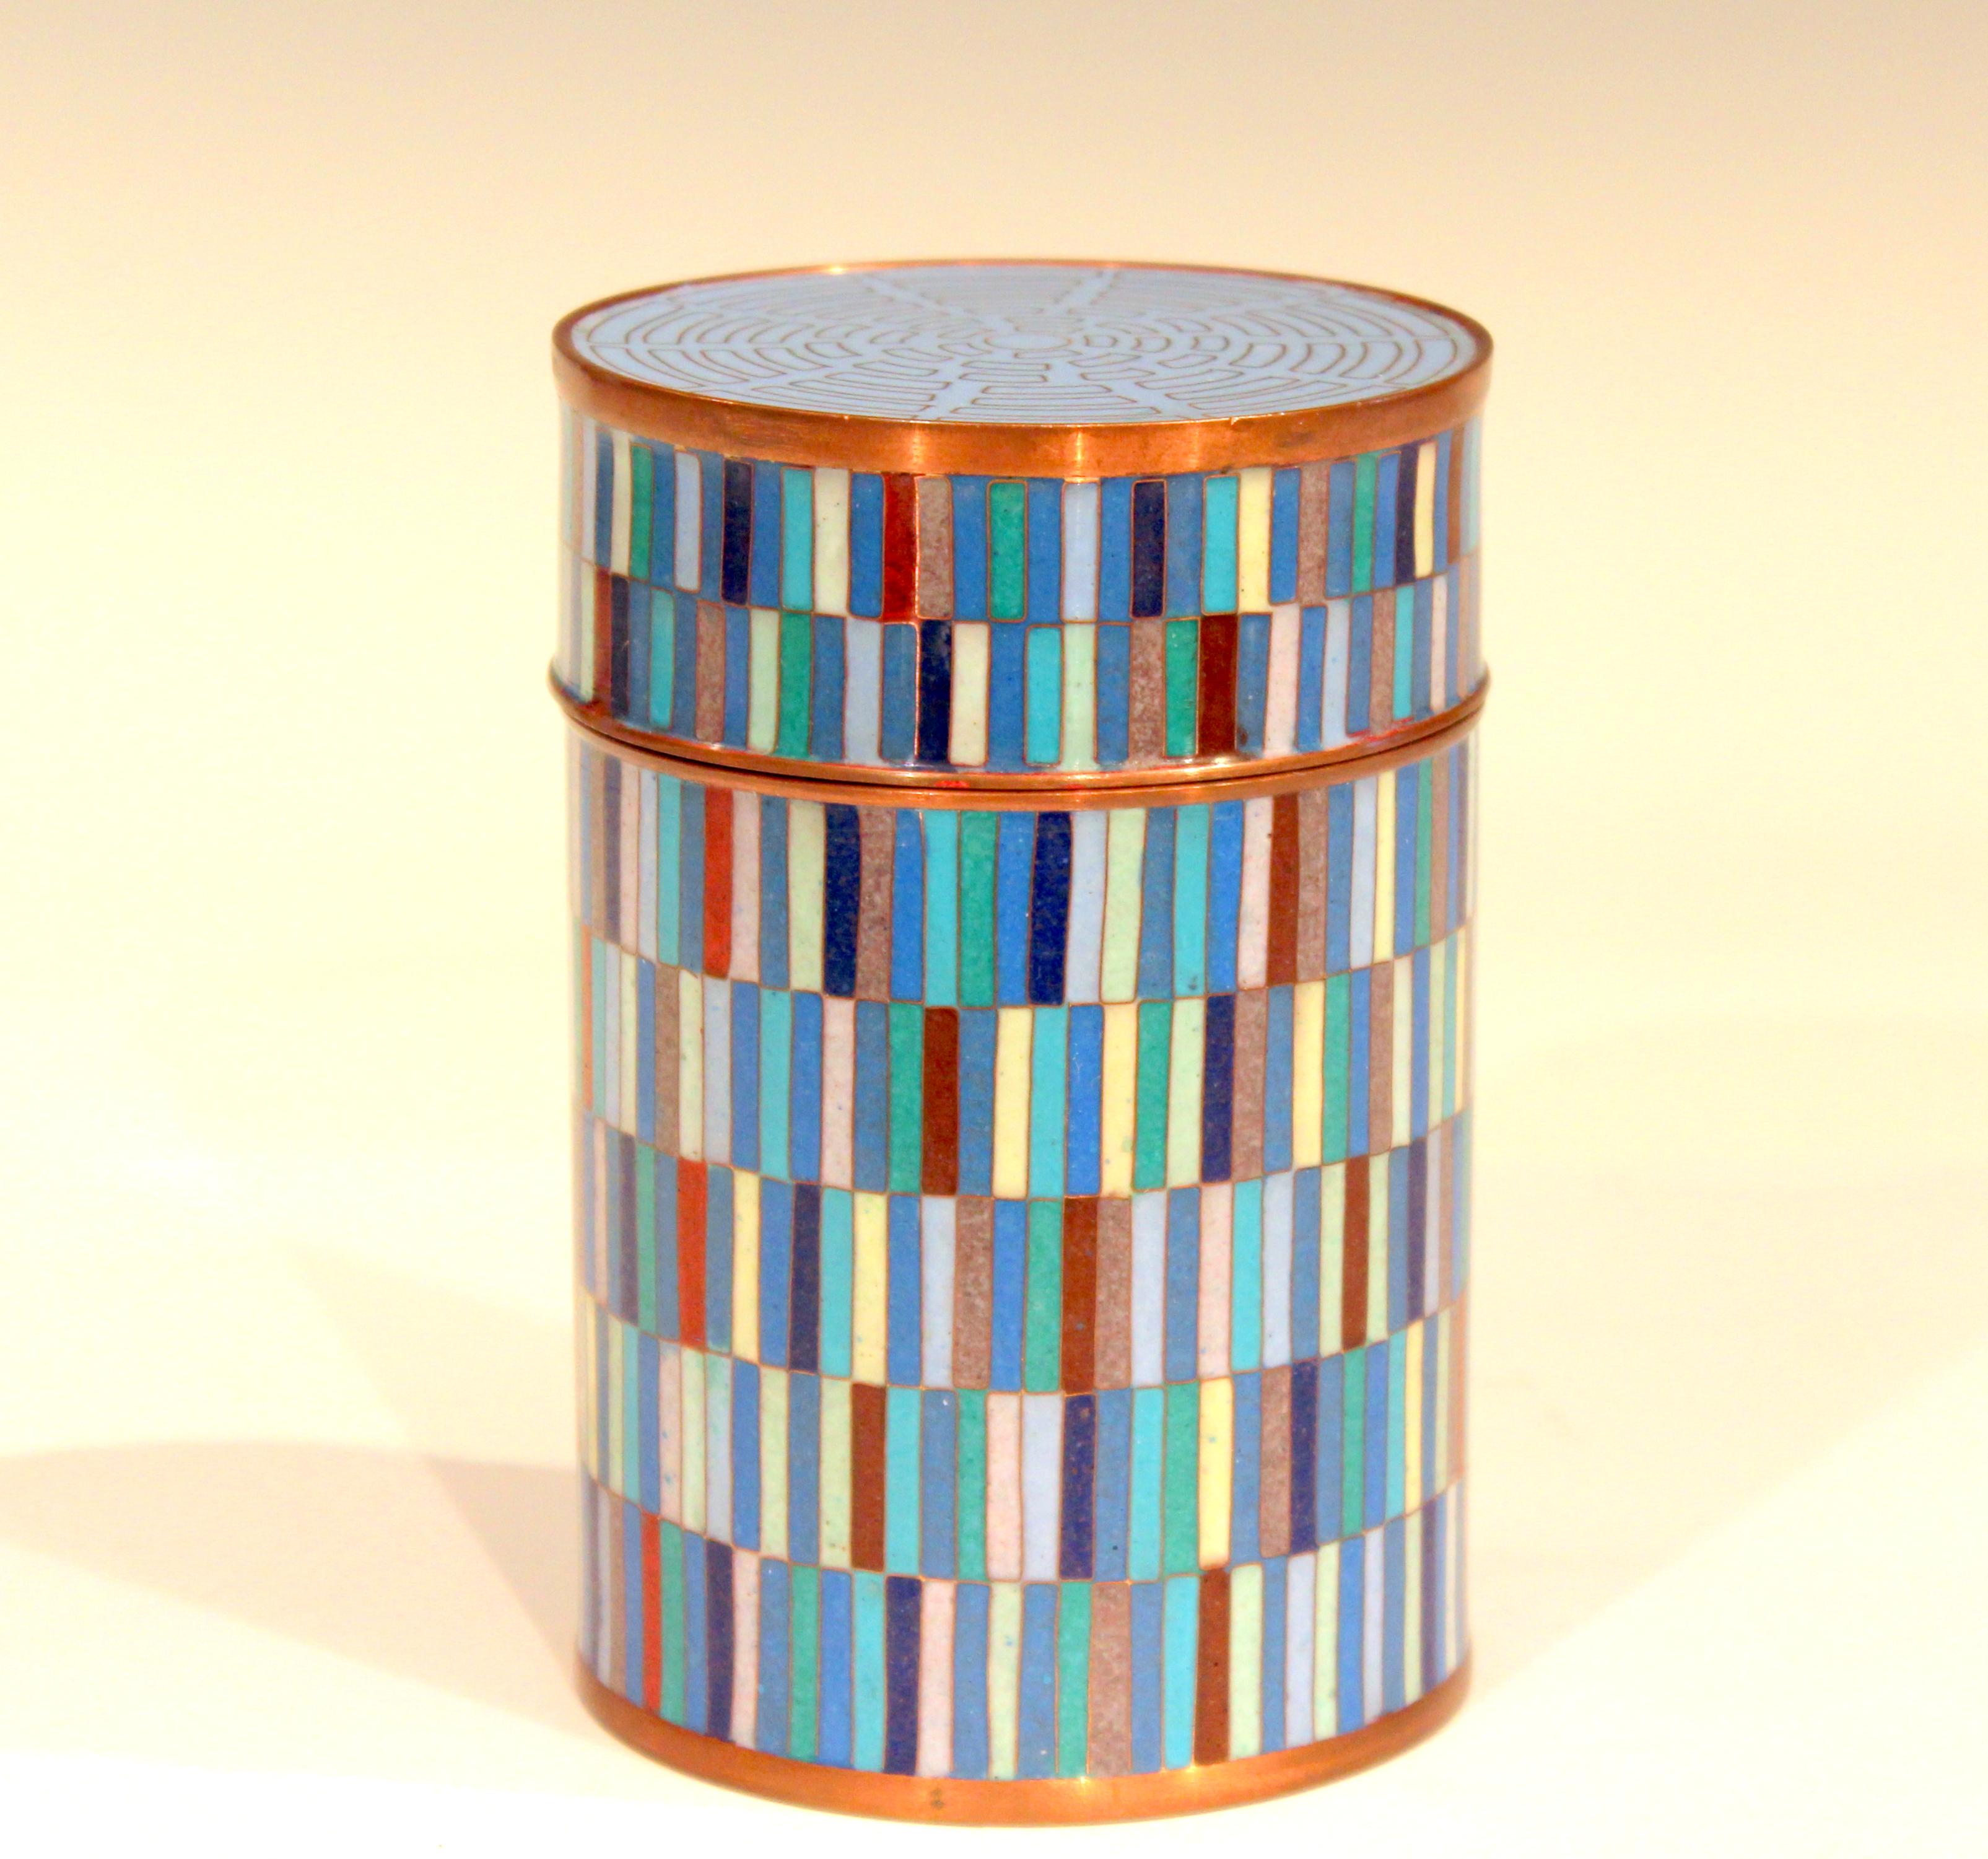 Vintage Fabienne Jouvin Cloisonné jar and cover with intricate design of multi colored bars. Great design, beautifully executed. This Parisian artist is still working. These were made in the 1990s. Measures: 5 1/4